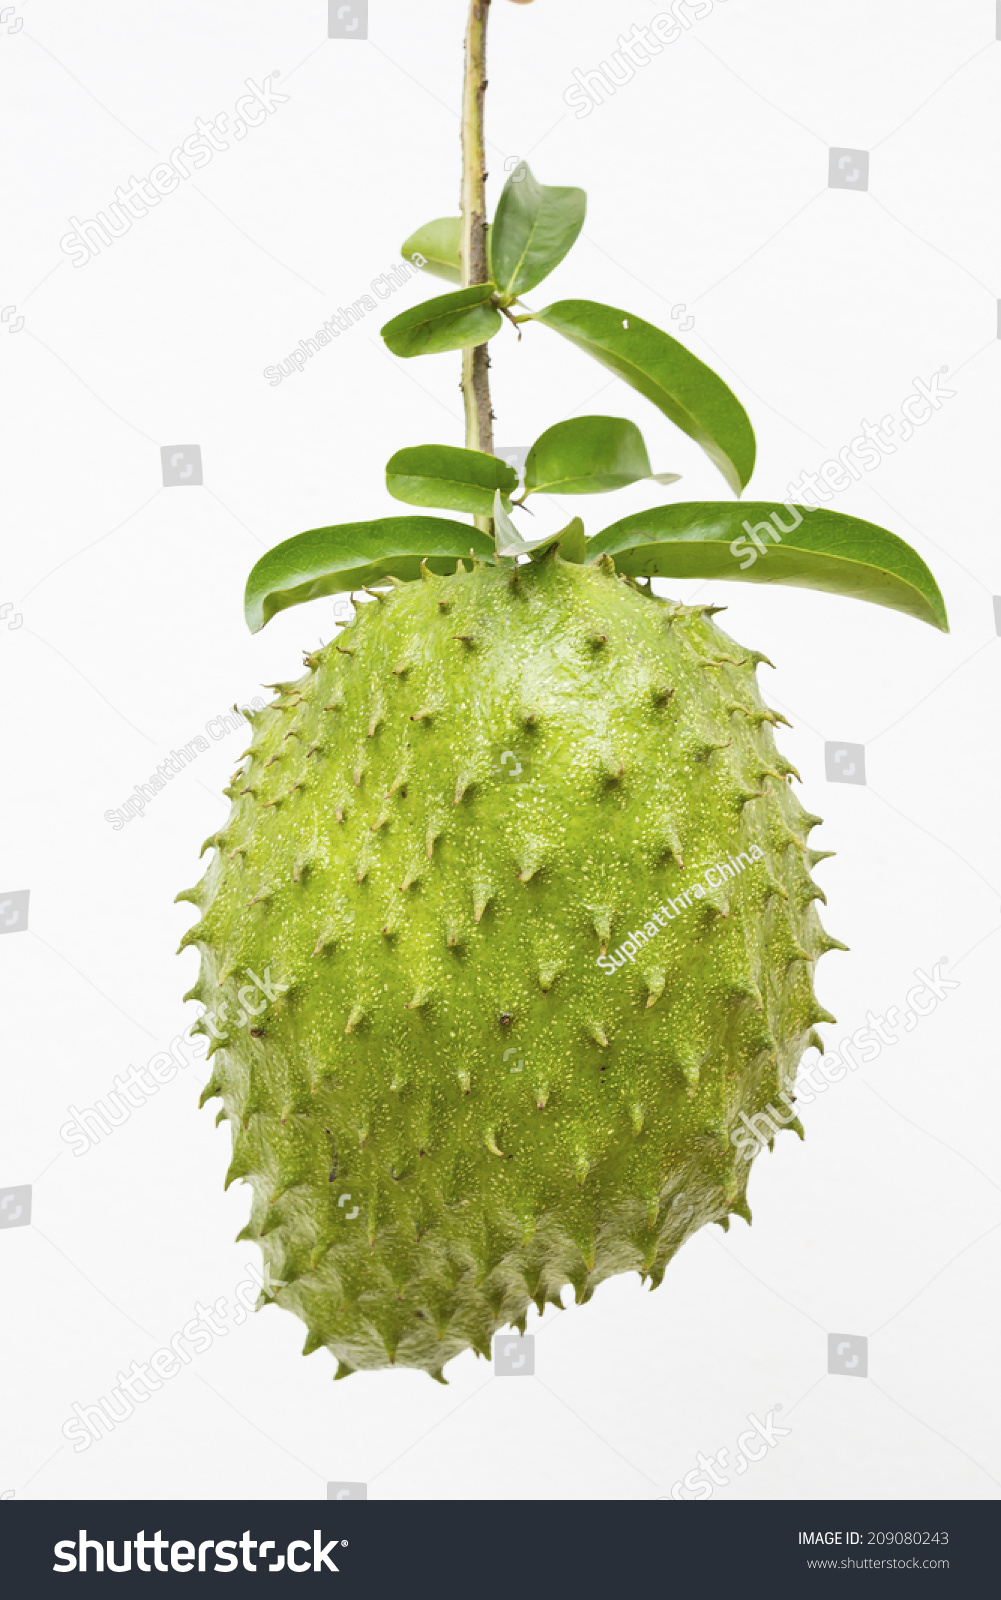 Soursop or Prickly Custard Apple or Durian belanda (Annona muricata L.) tropical fruit used for fresh juices isolated on white background #209080243